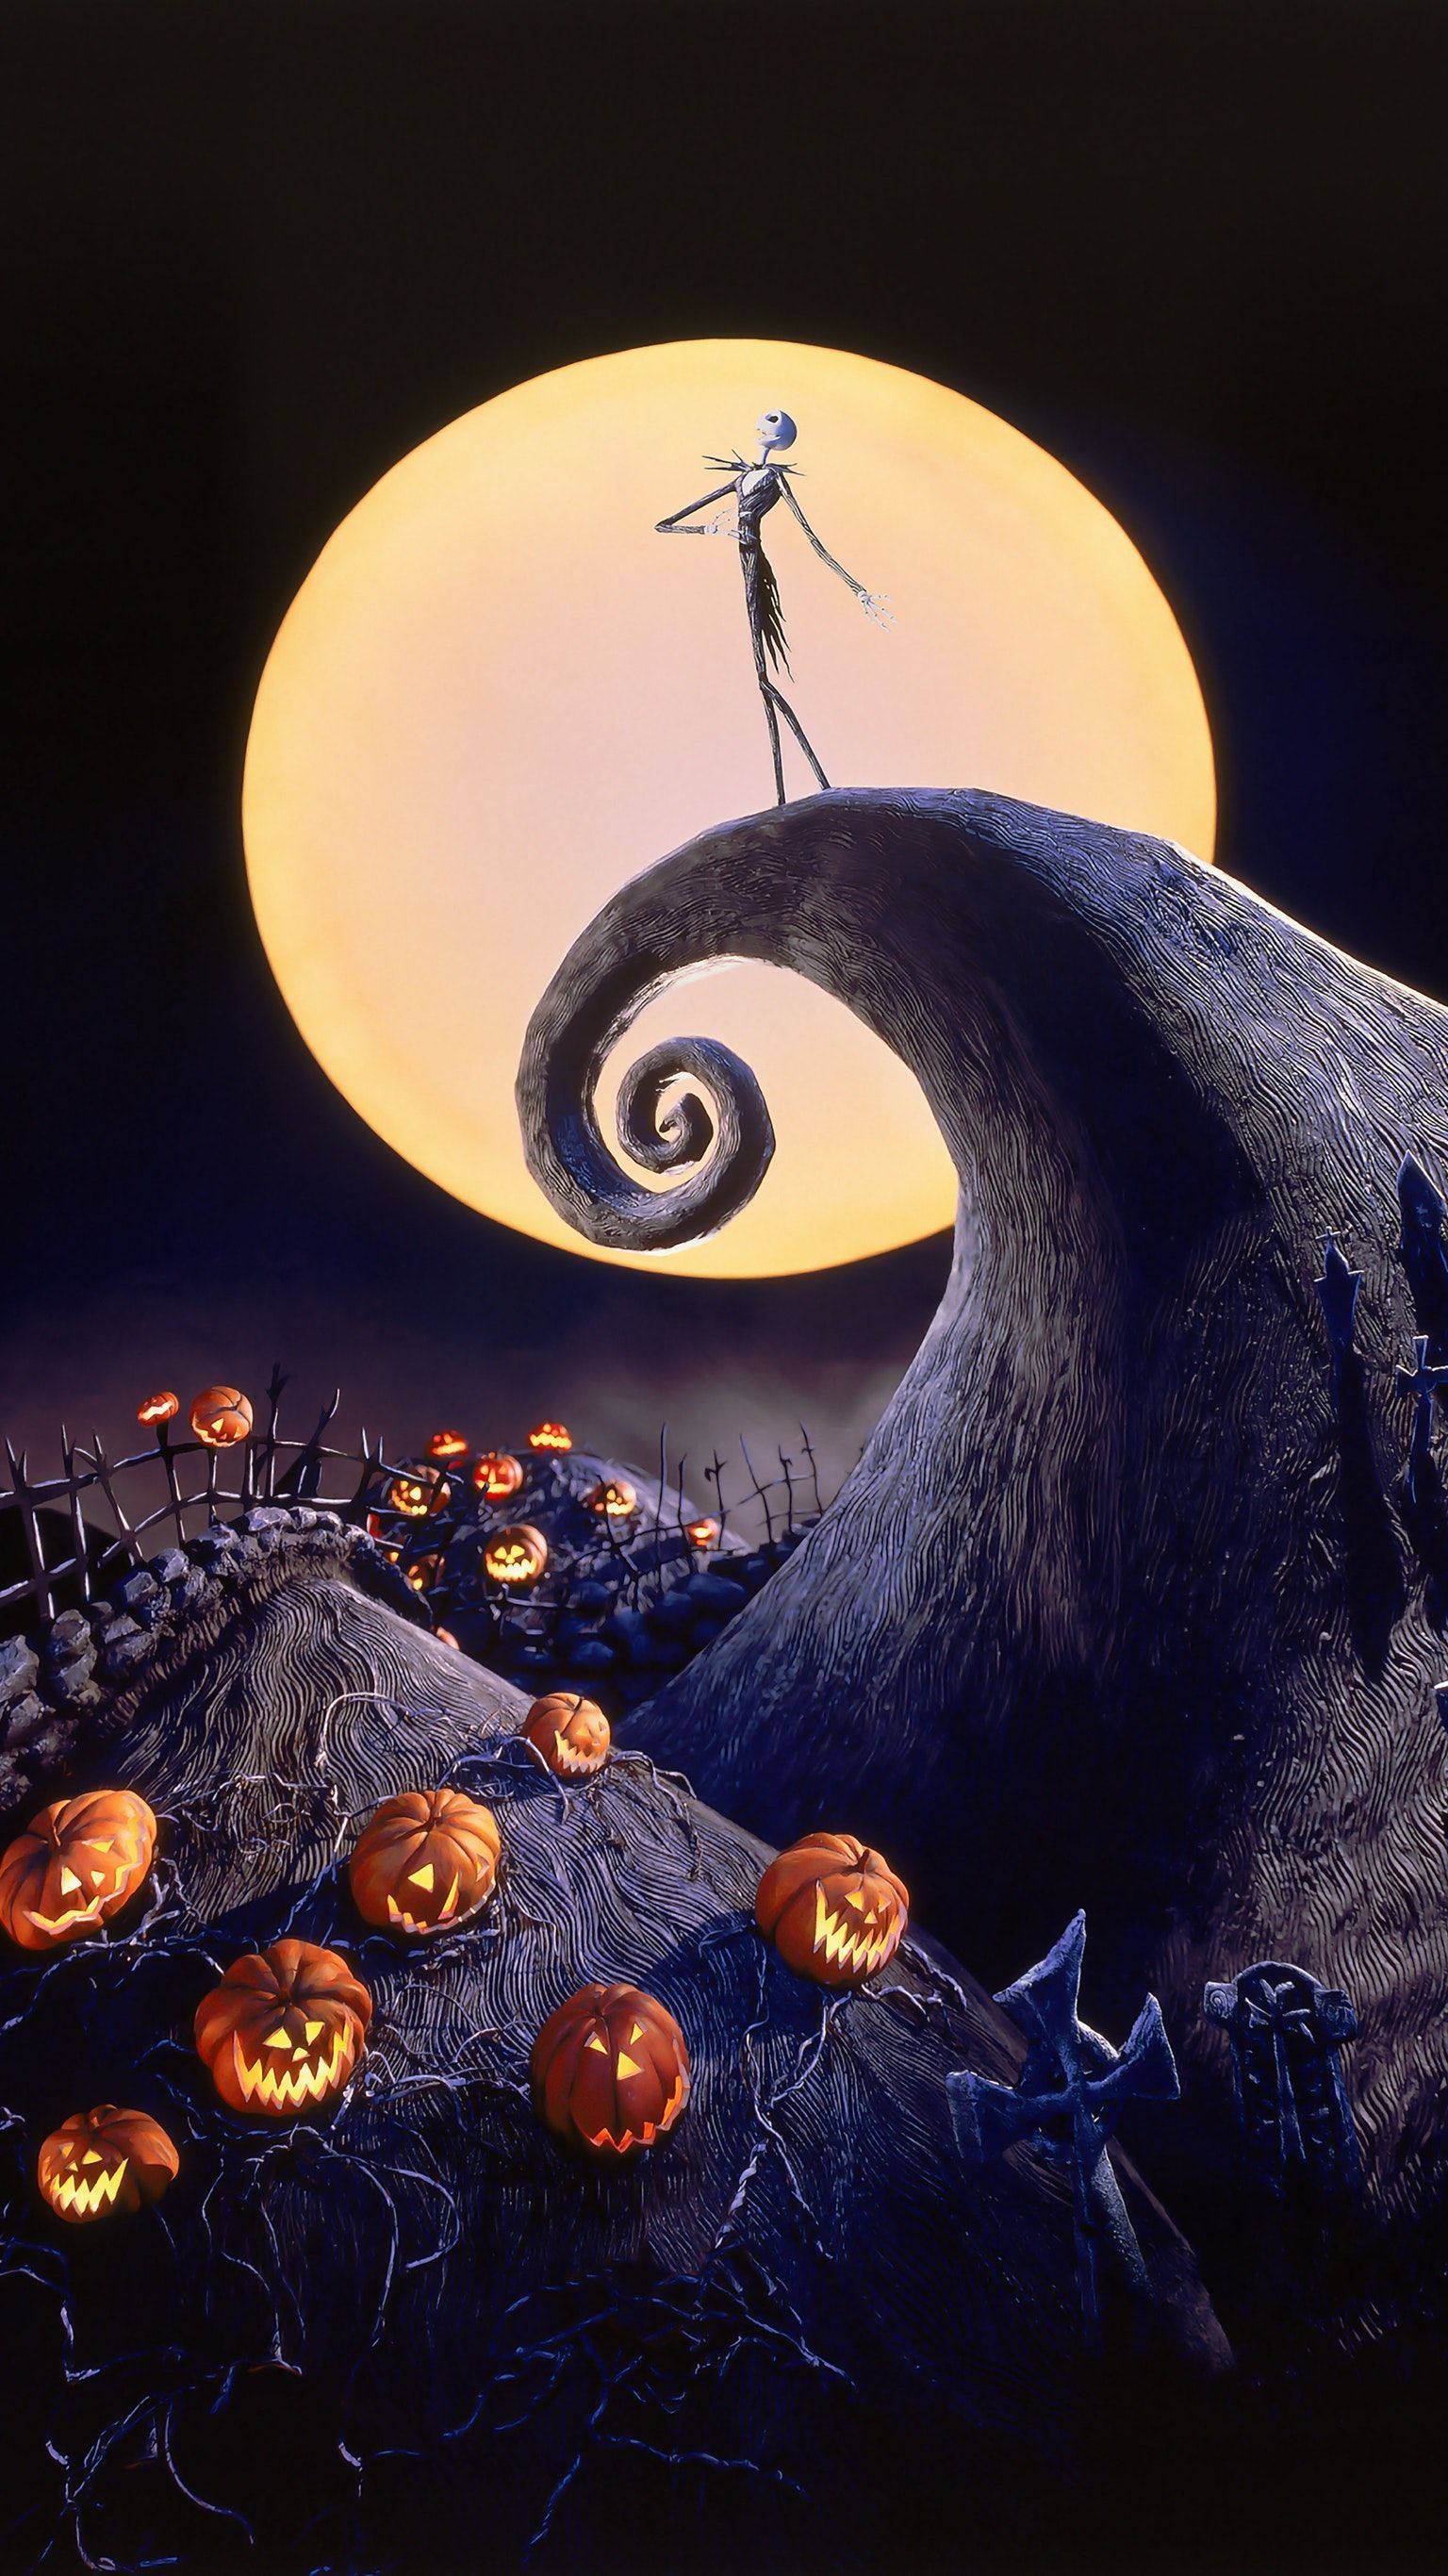 Free download nightmare before christmas desktop wallpaper wwwwallpapers in  hd 1280x800 for your Desktop Mobile  Tablet  Explore 45 Nightmare  Before Christmas HD Wallpaper  Nightmare Before Christmas Desktop Wallpaper  The